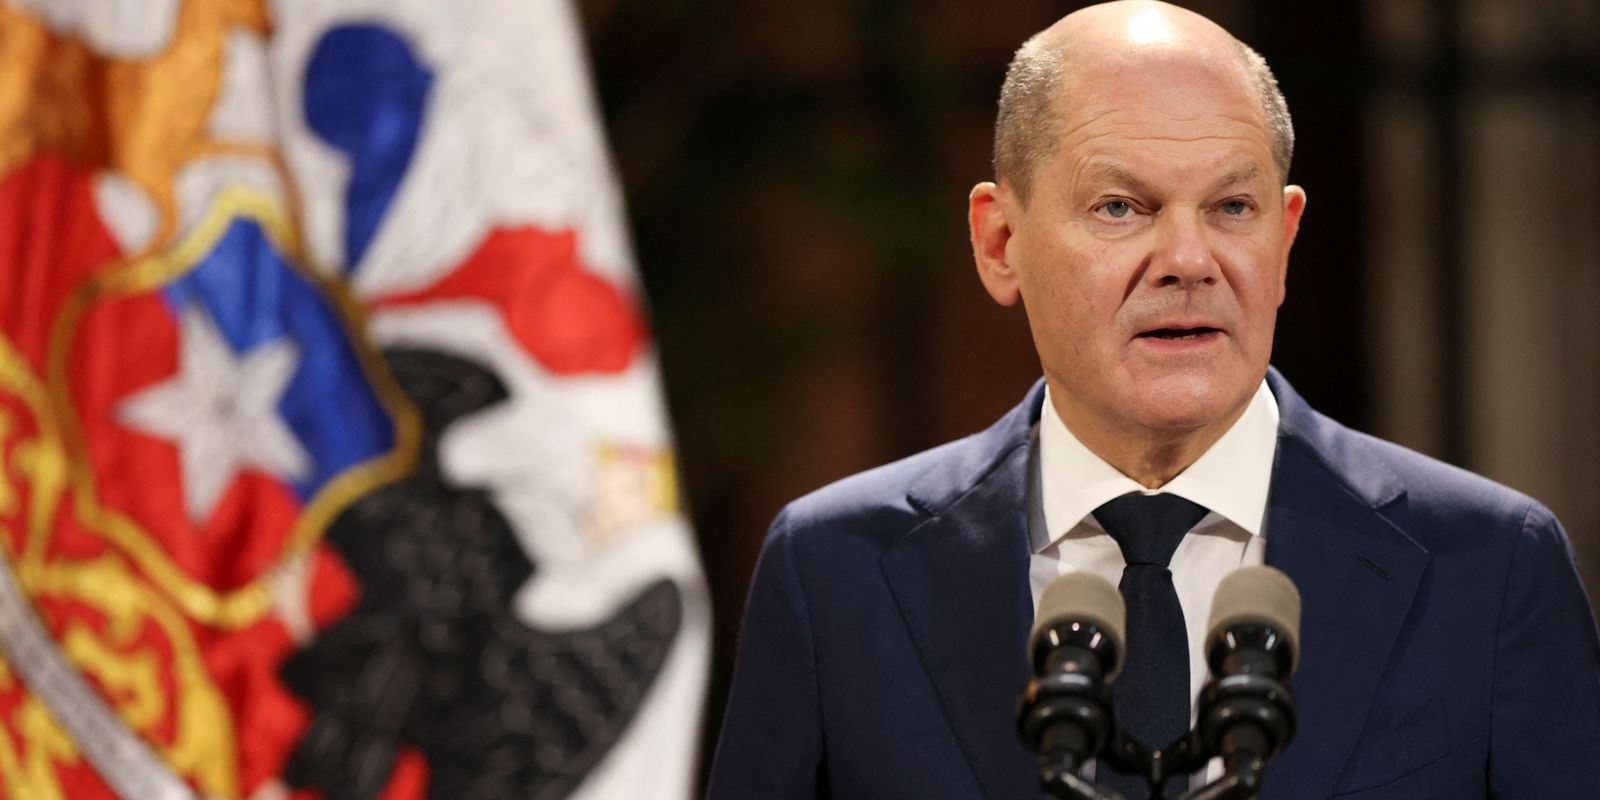 Scholz plays down differences over Ukraine on tour of South America